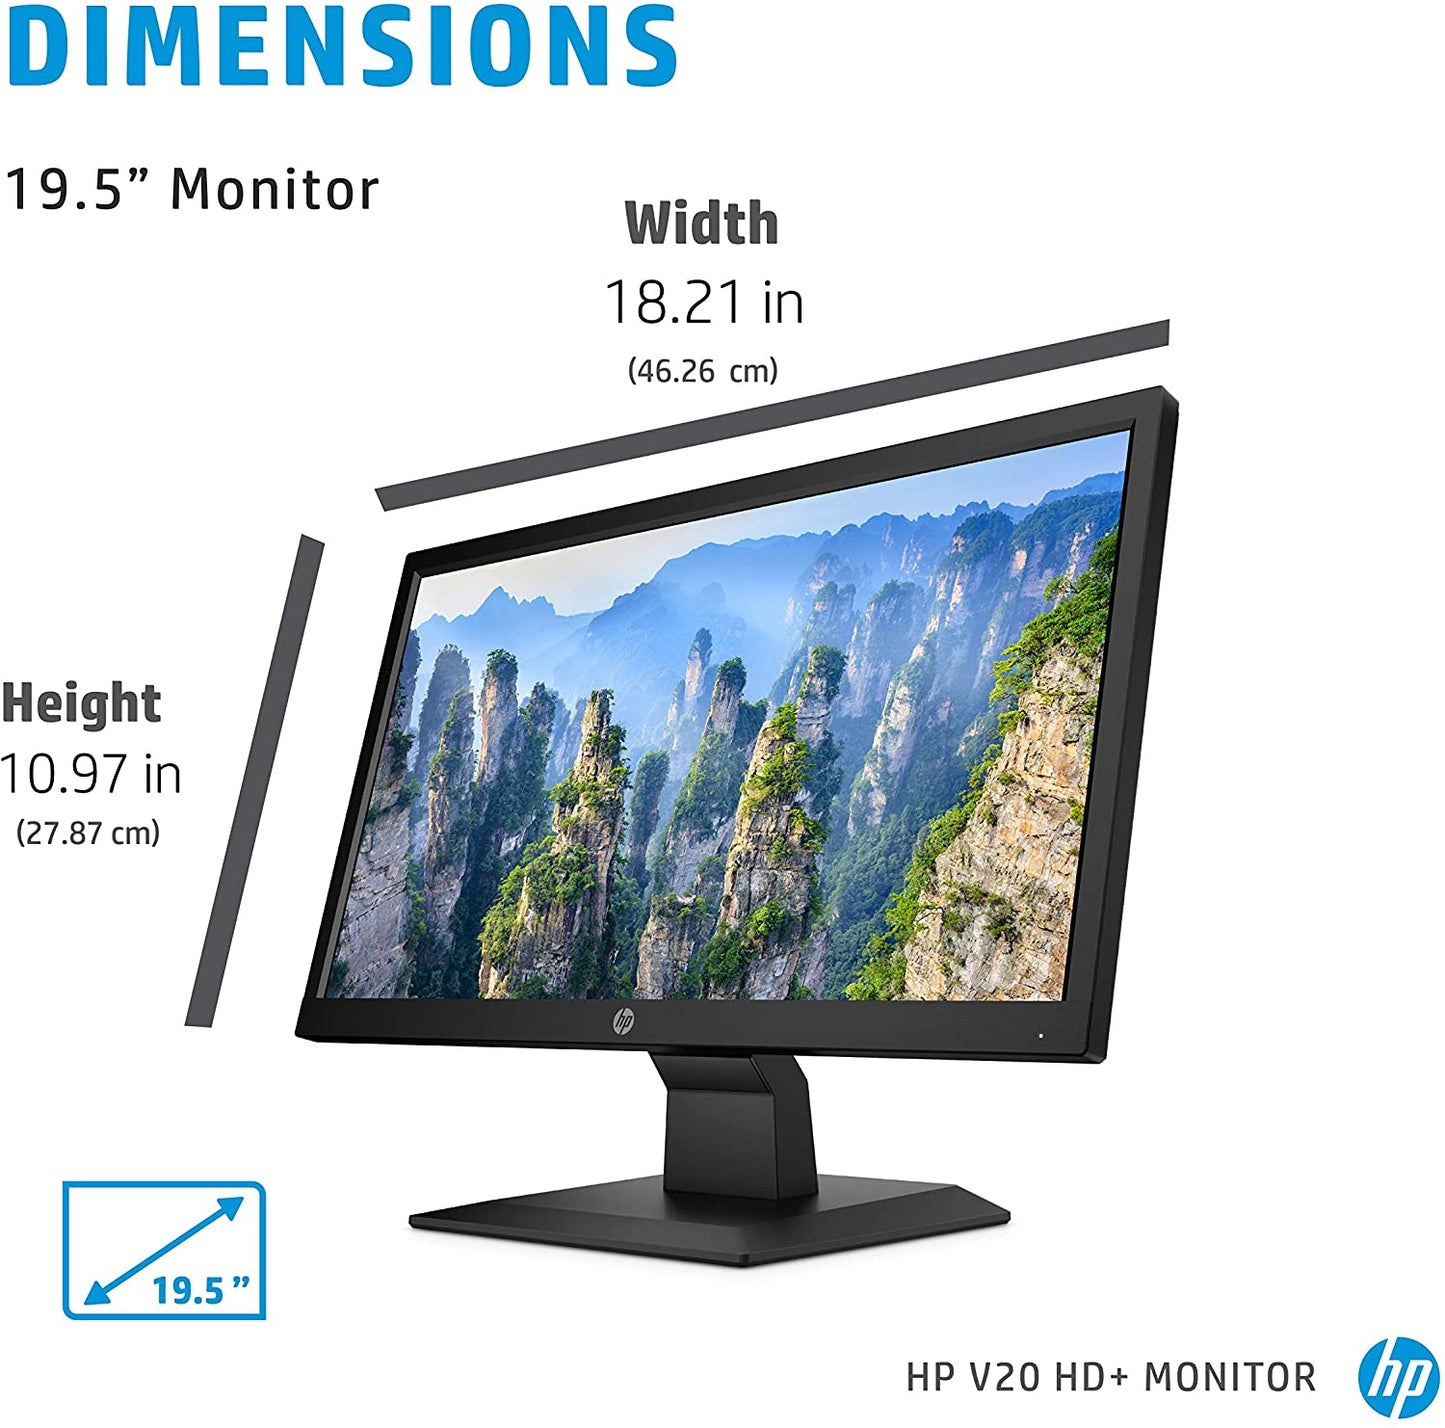 HP V20 HD+ 19.5-inch LED Computer Monitor - Low Blue Light